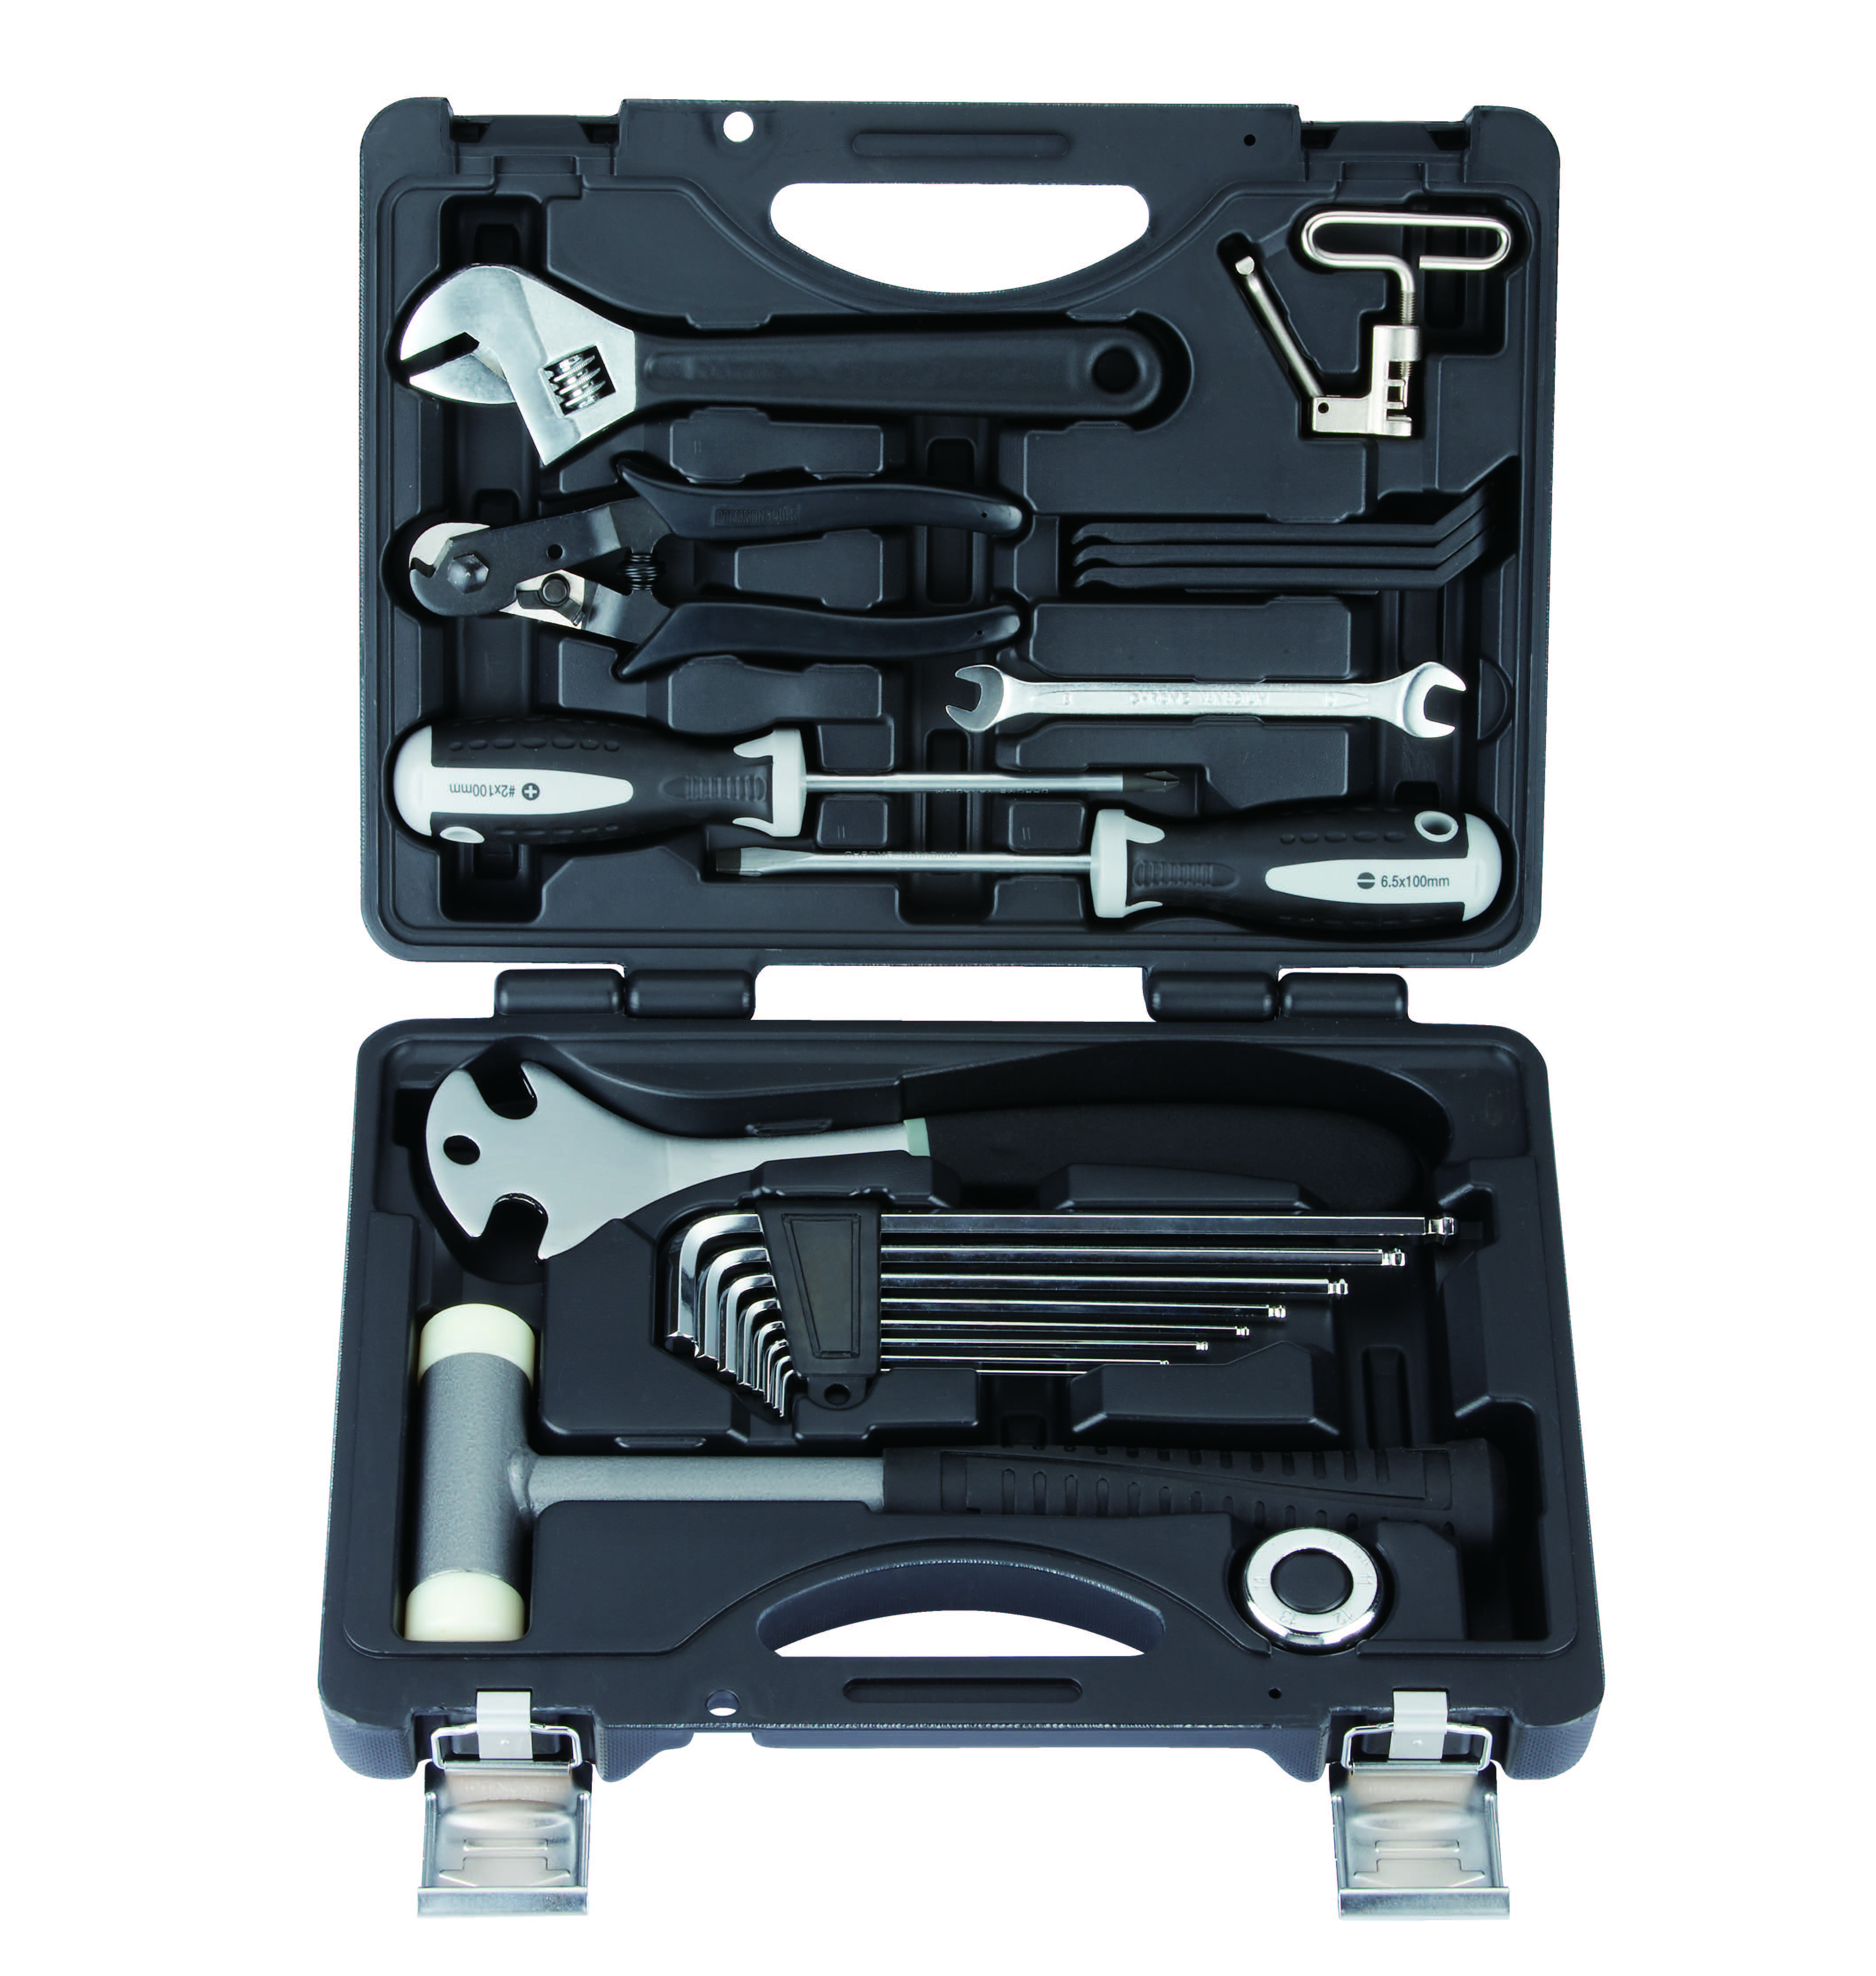 19 in 1 tools set